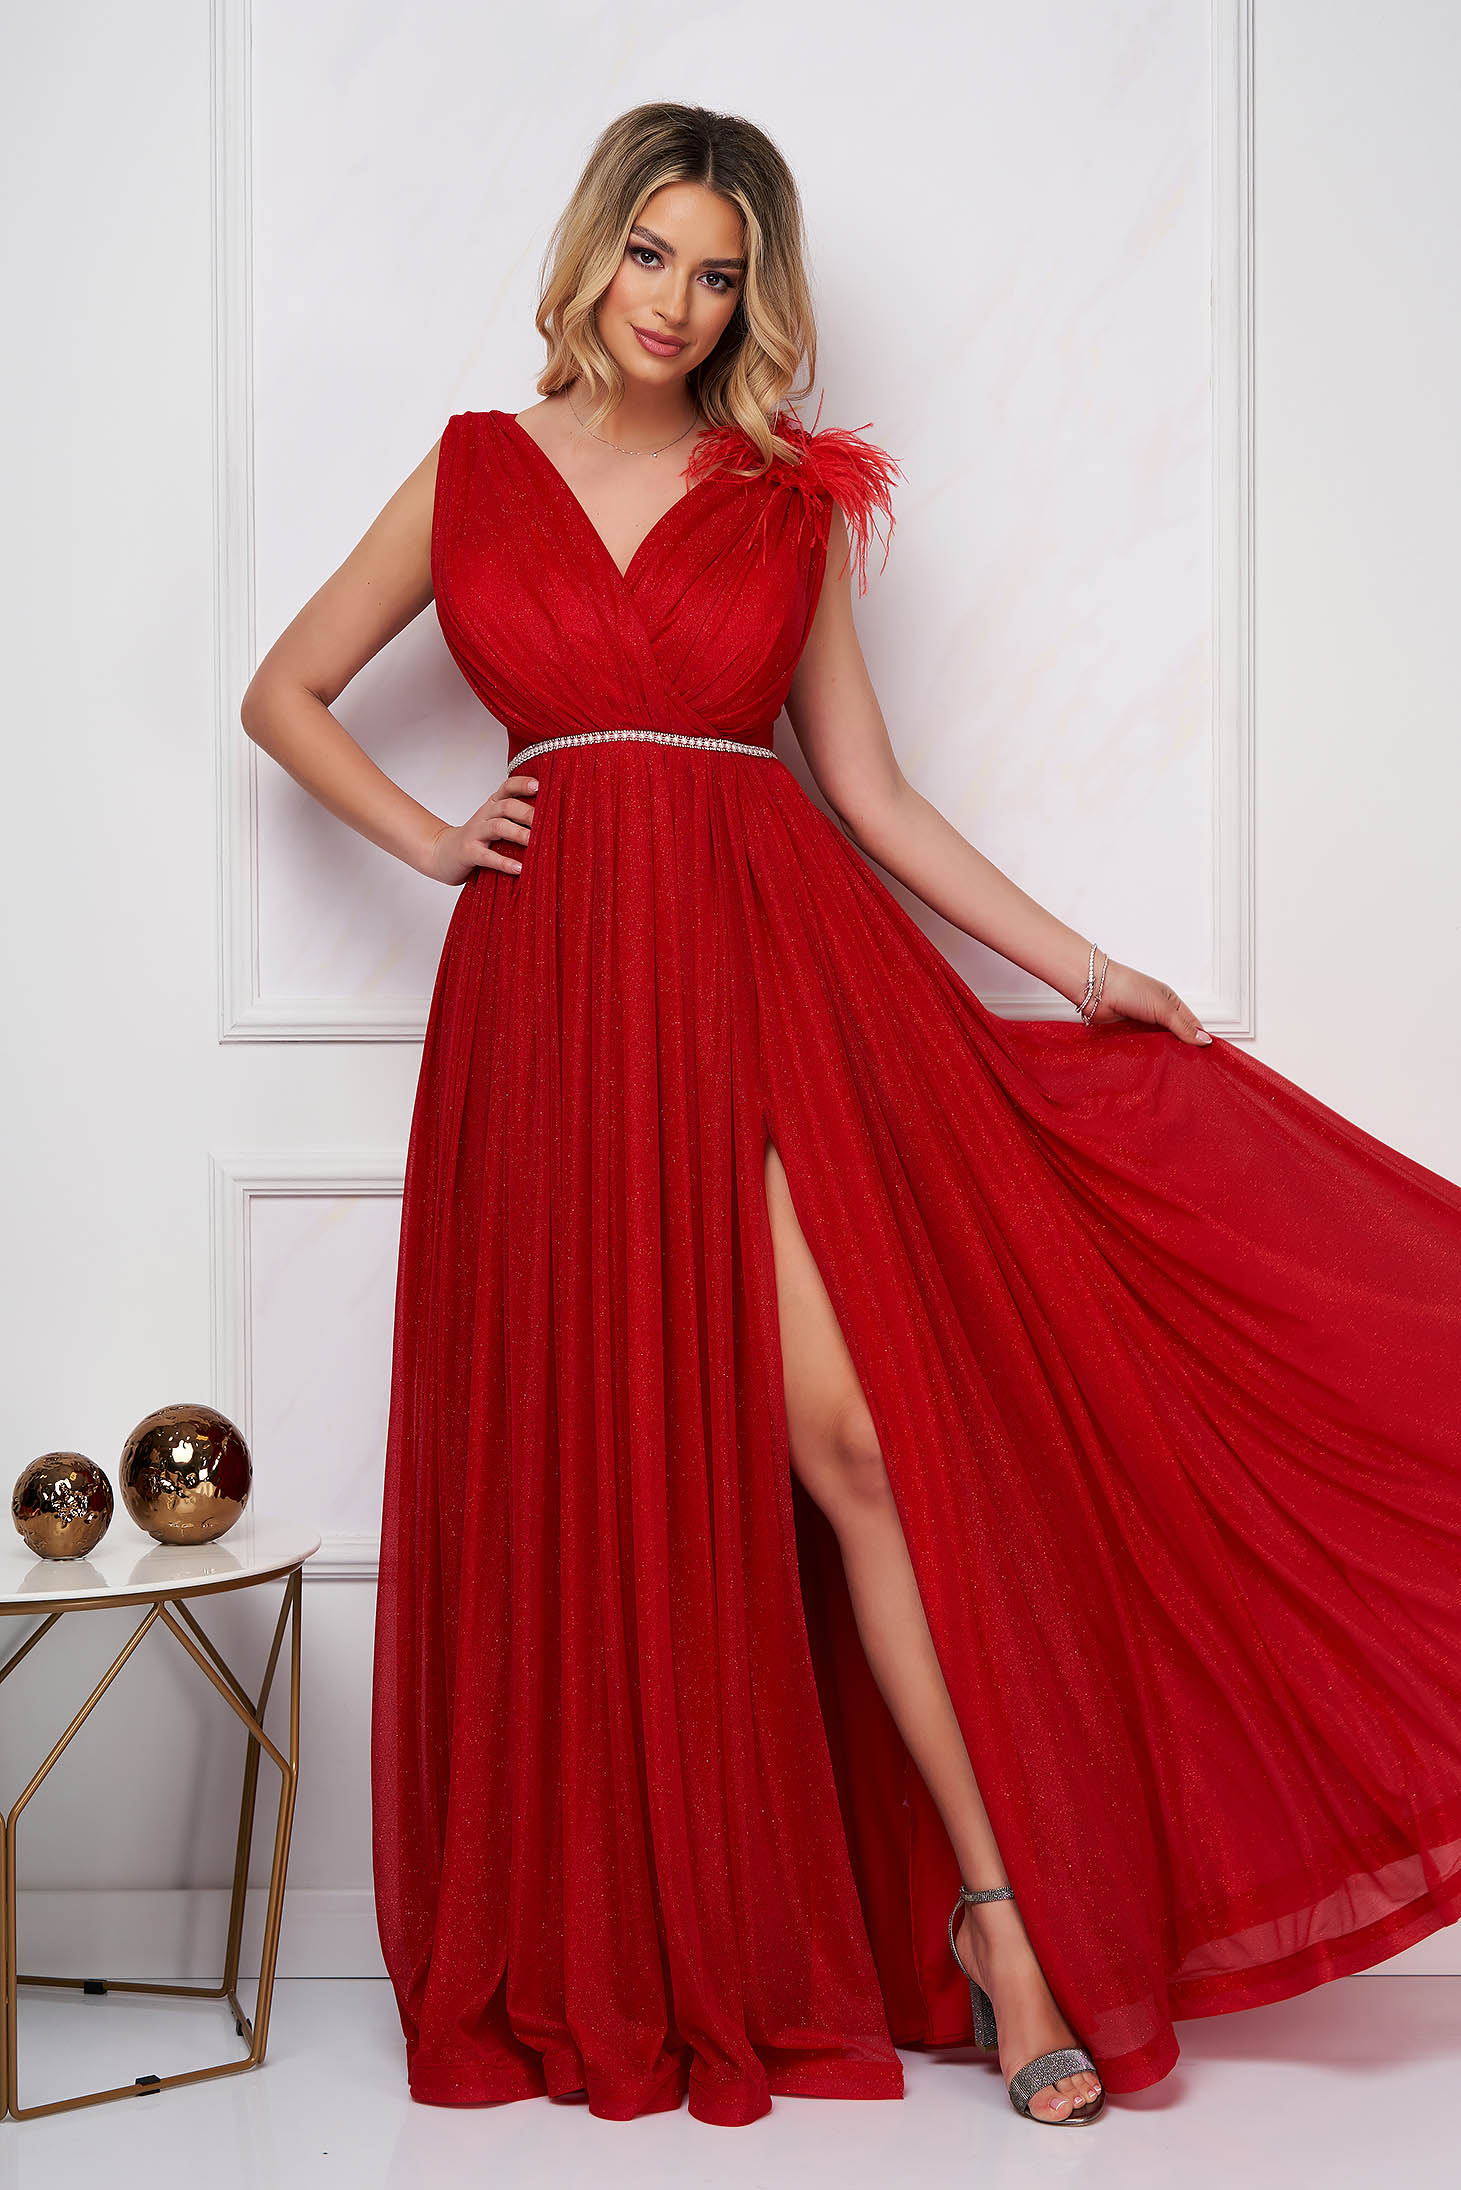 Red dress occasional long cloche from tulle with glitter details with crystal embellished details